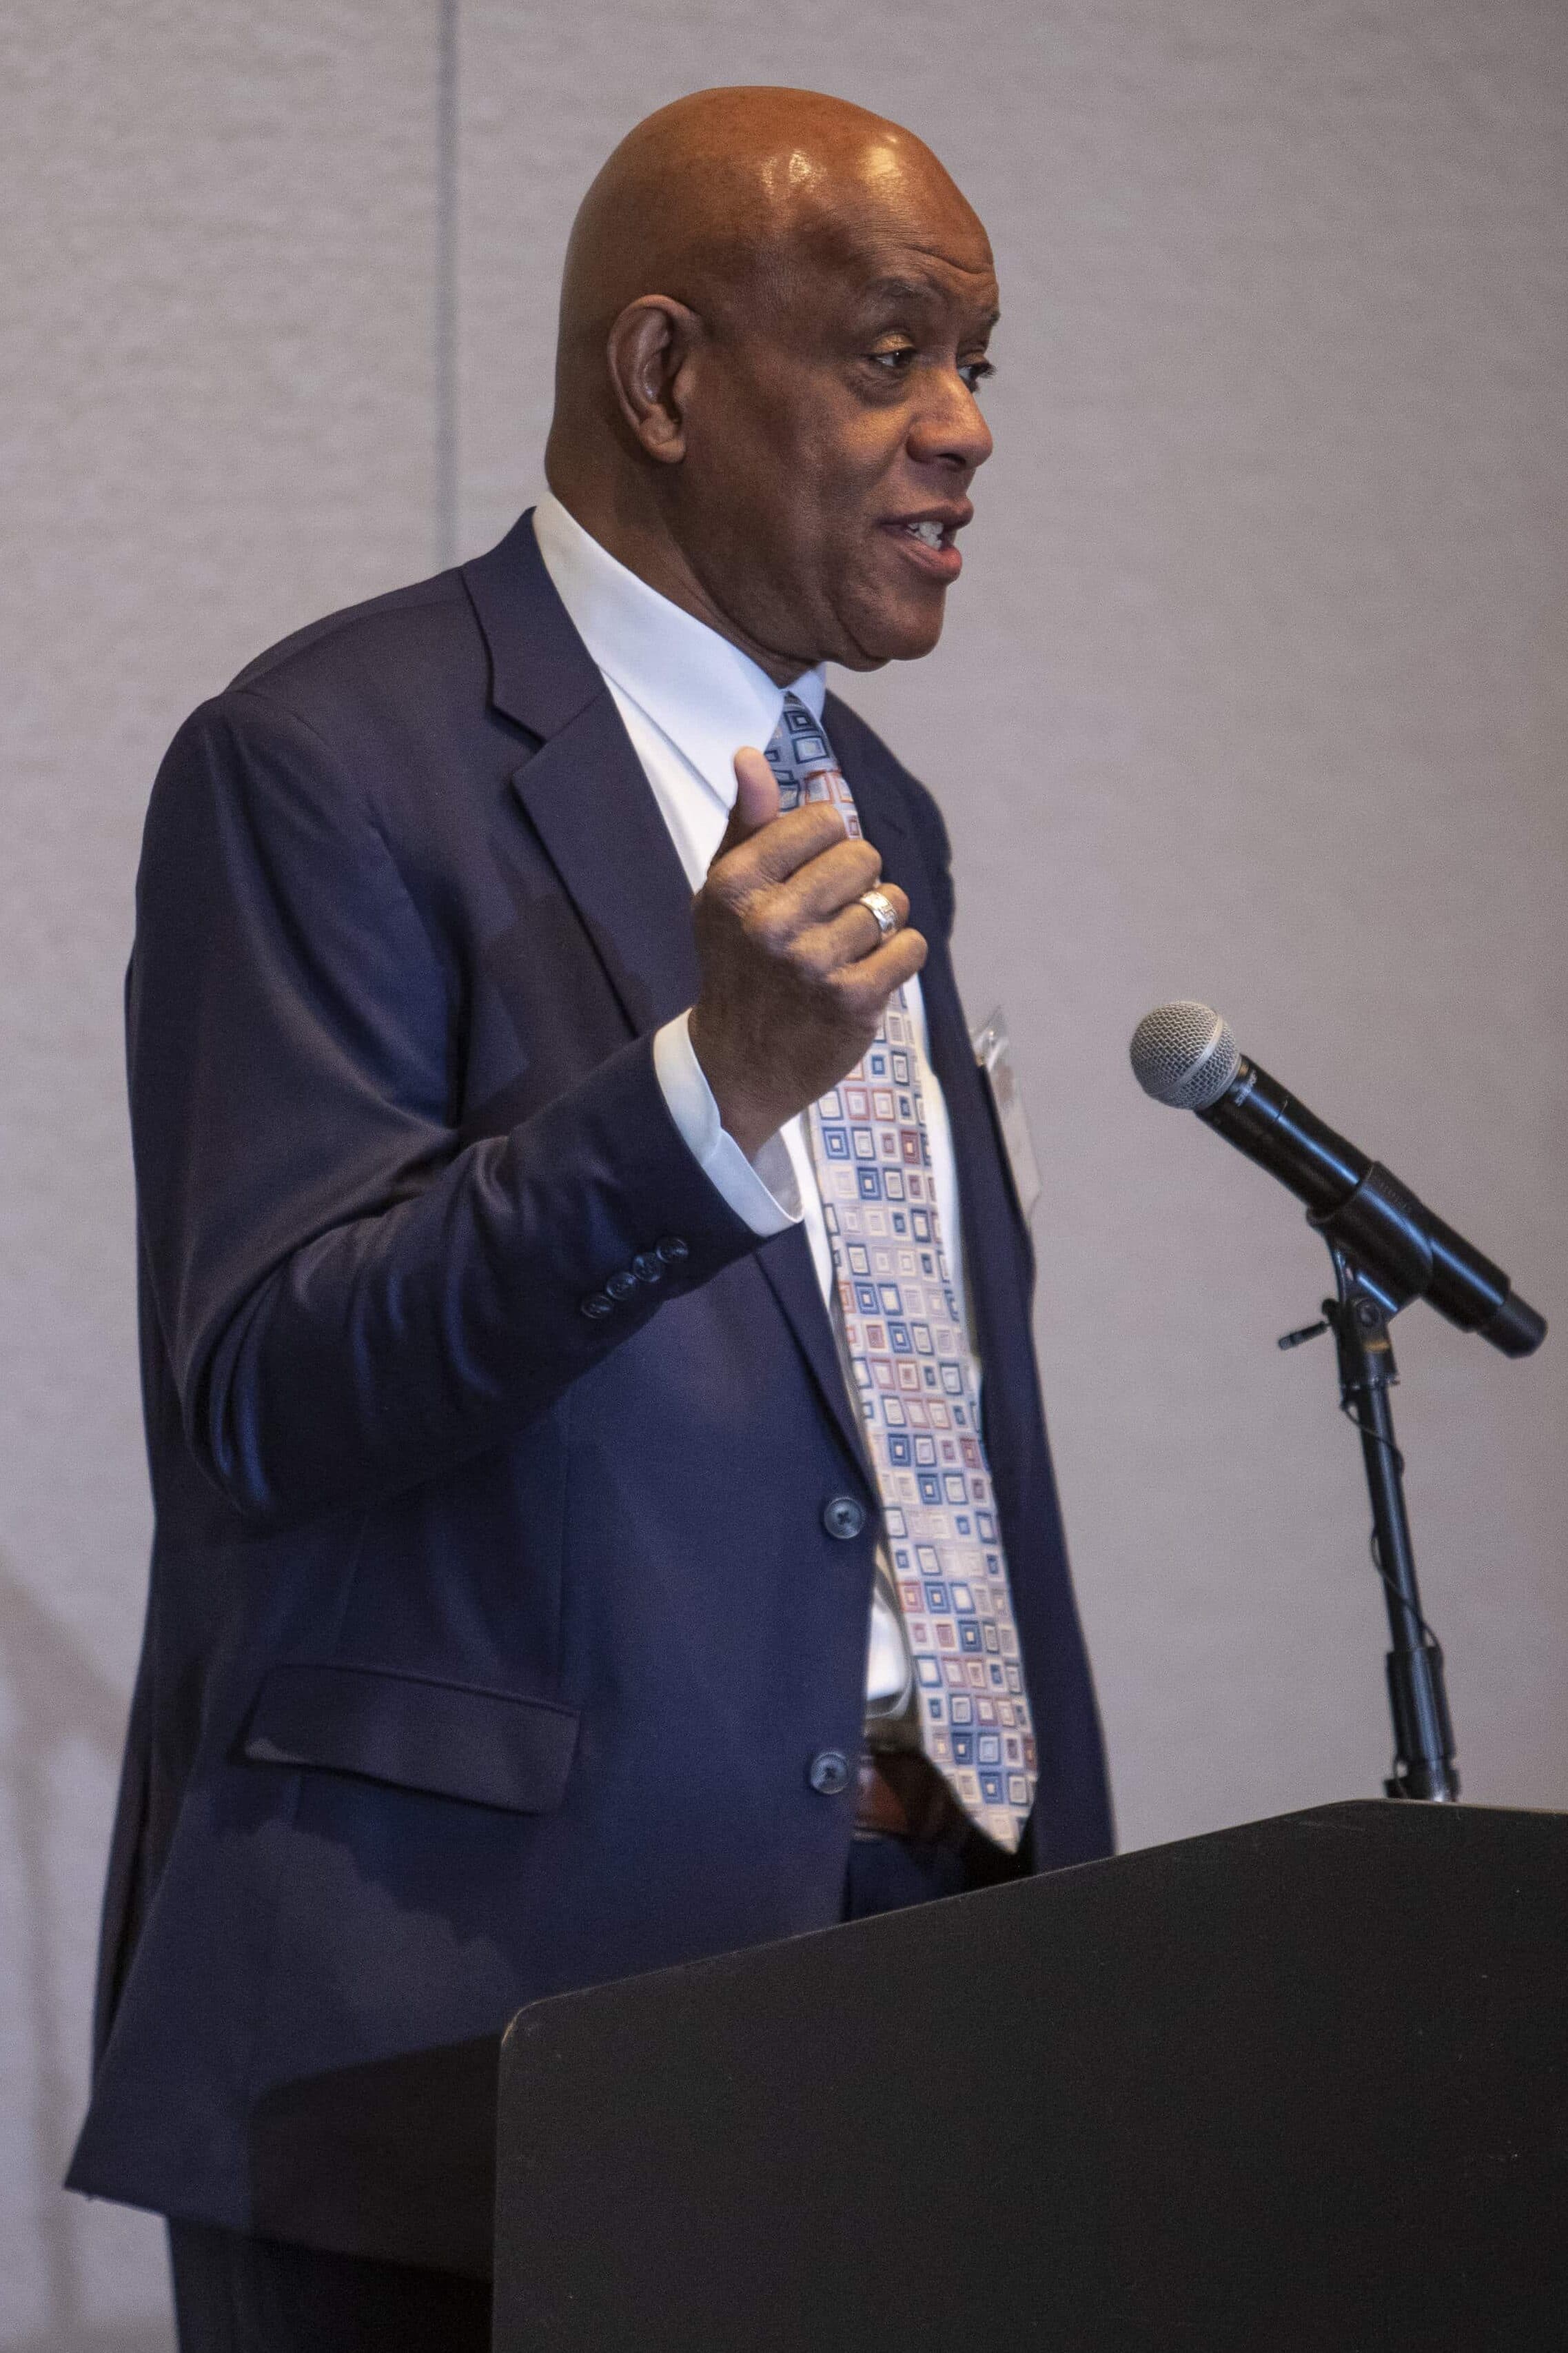 Keynote speaker Al Richmond, MSW, encouraged researchers to seek out transformative experiences and ensure equity in their work. 